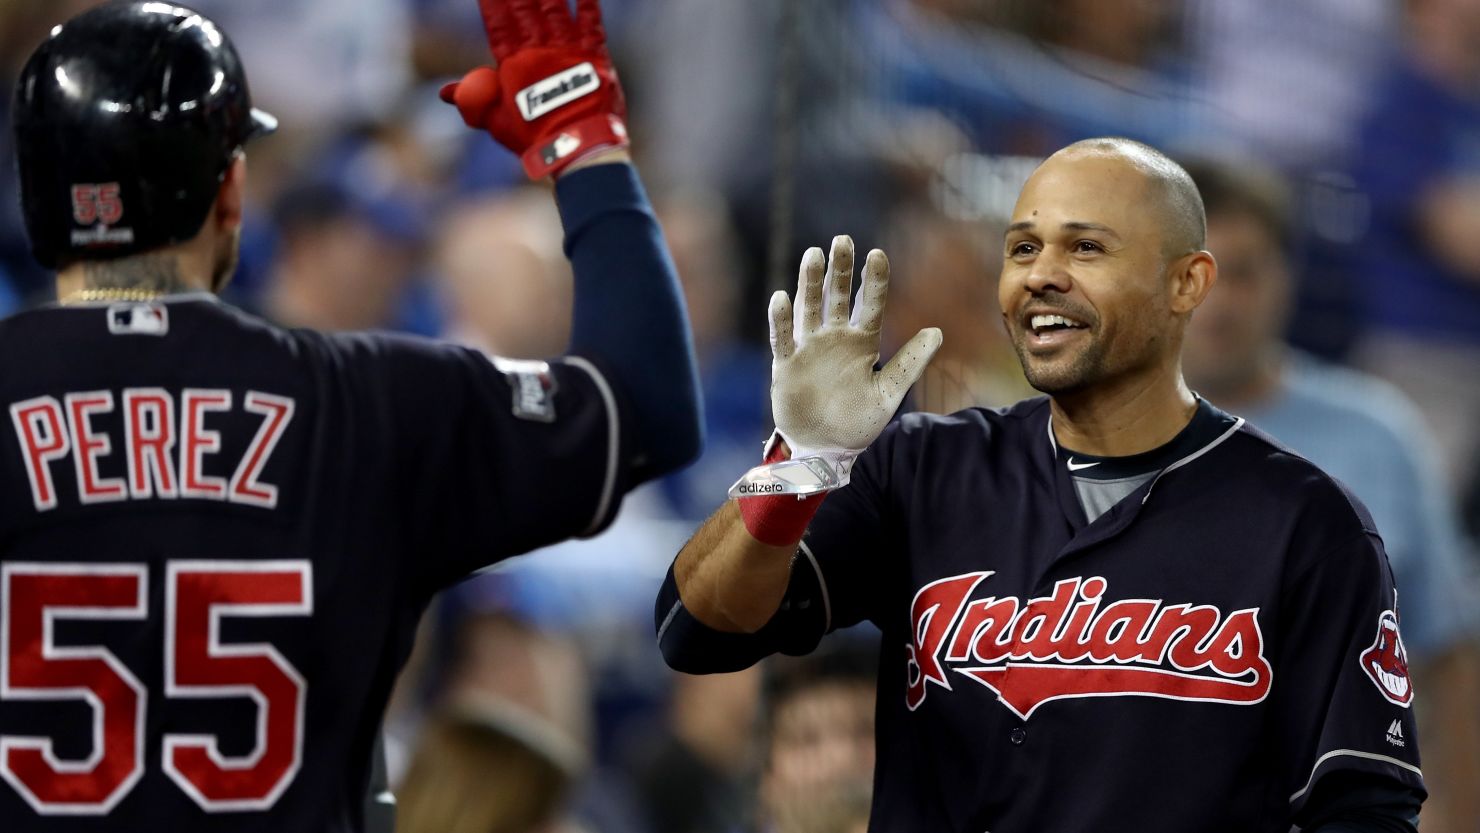 The Indians' Coco Crisp celebrates after hitting a home run in the fourth inning of game 5 in the ALCS